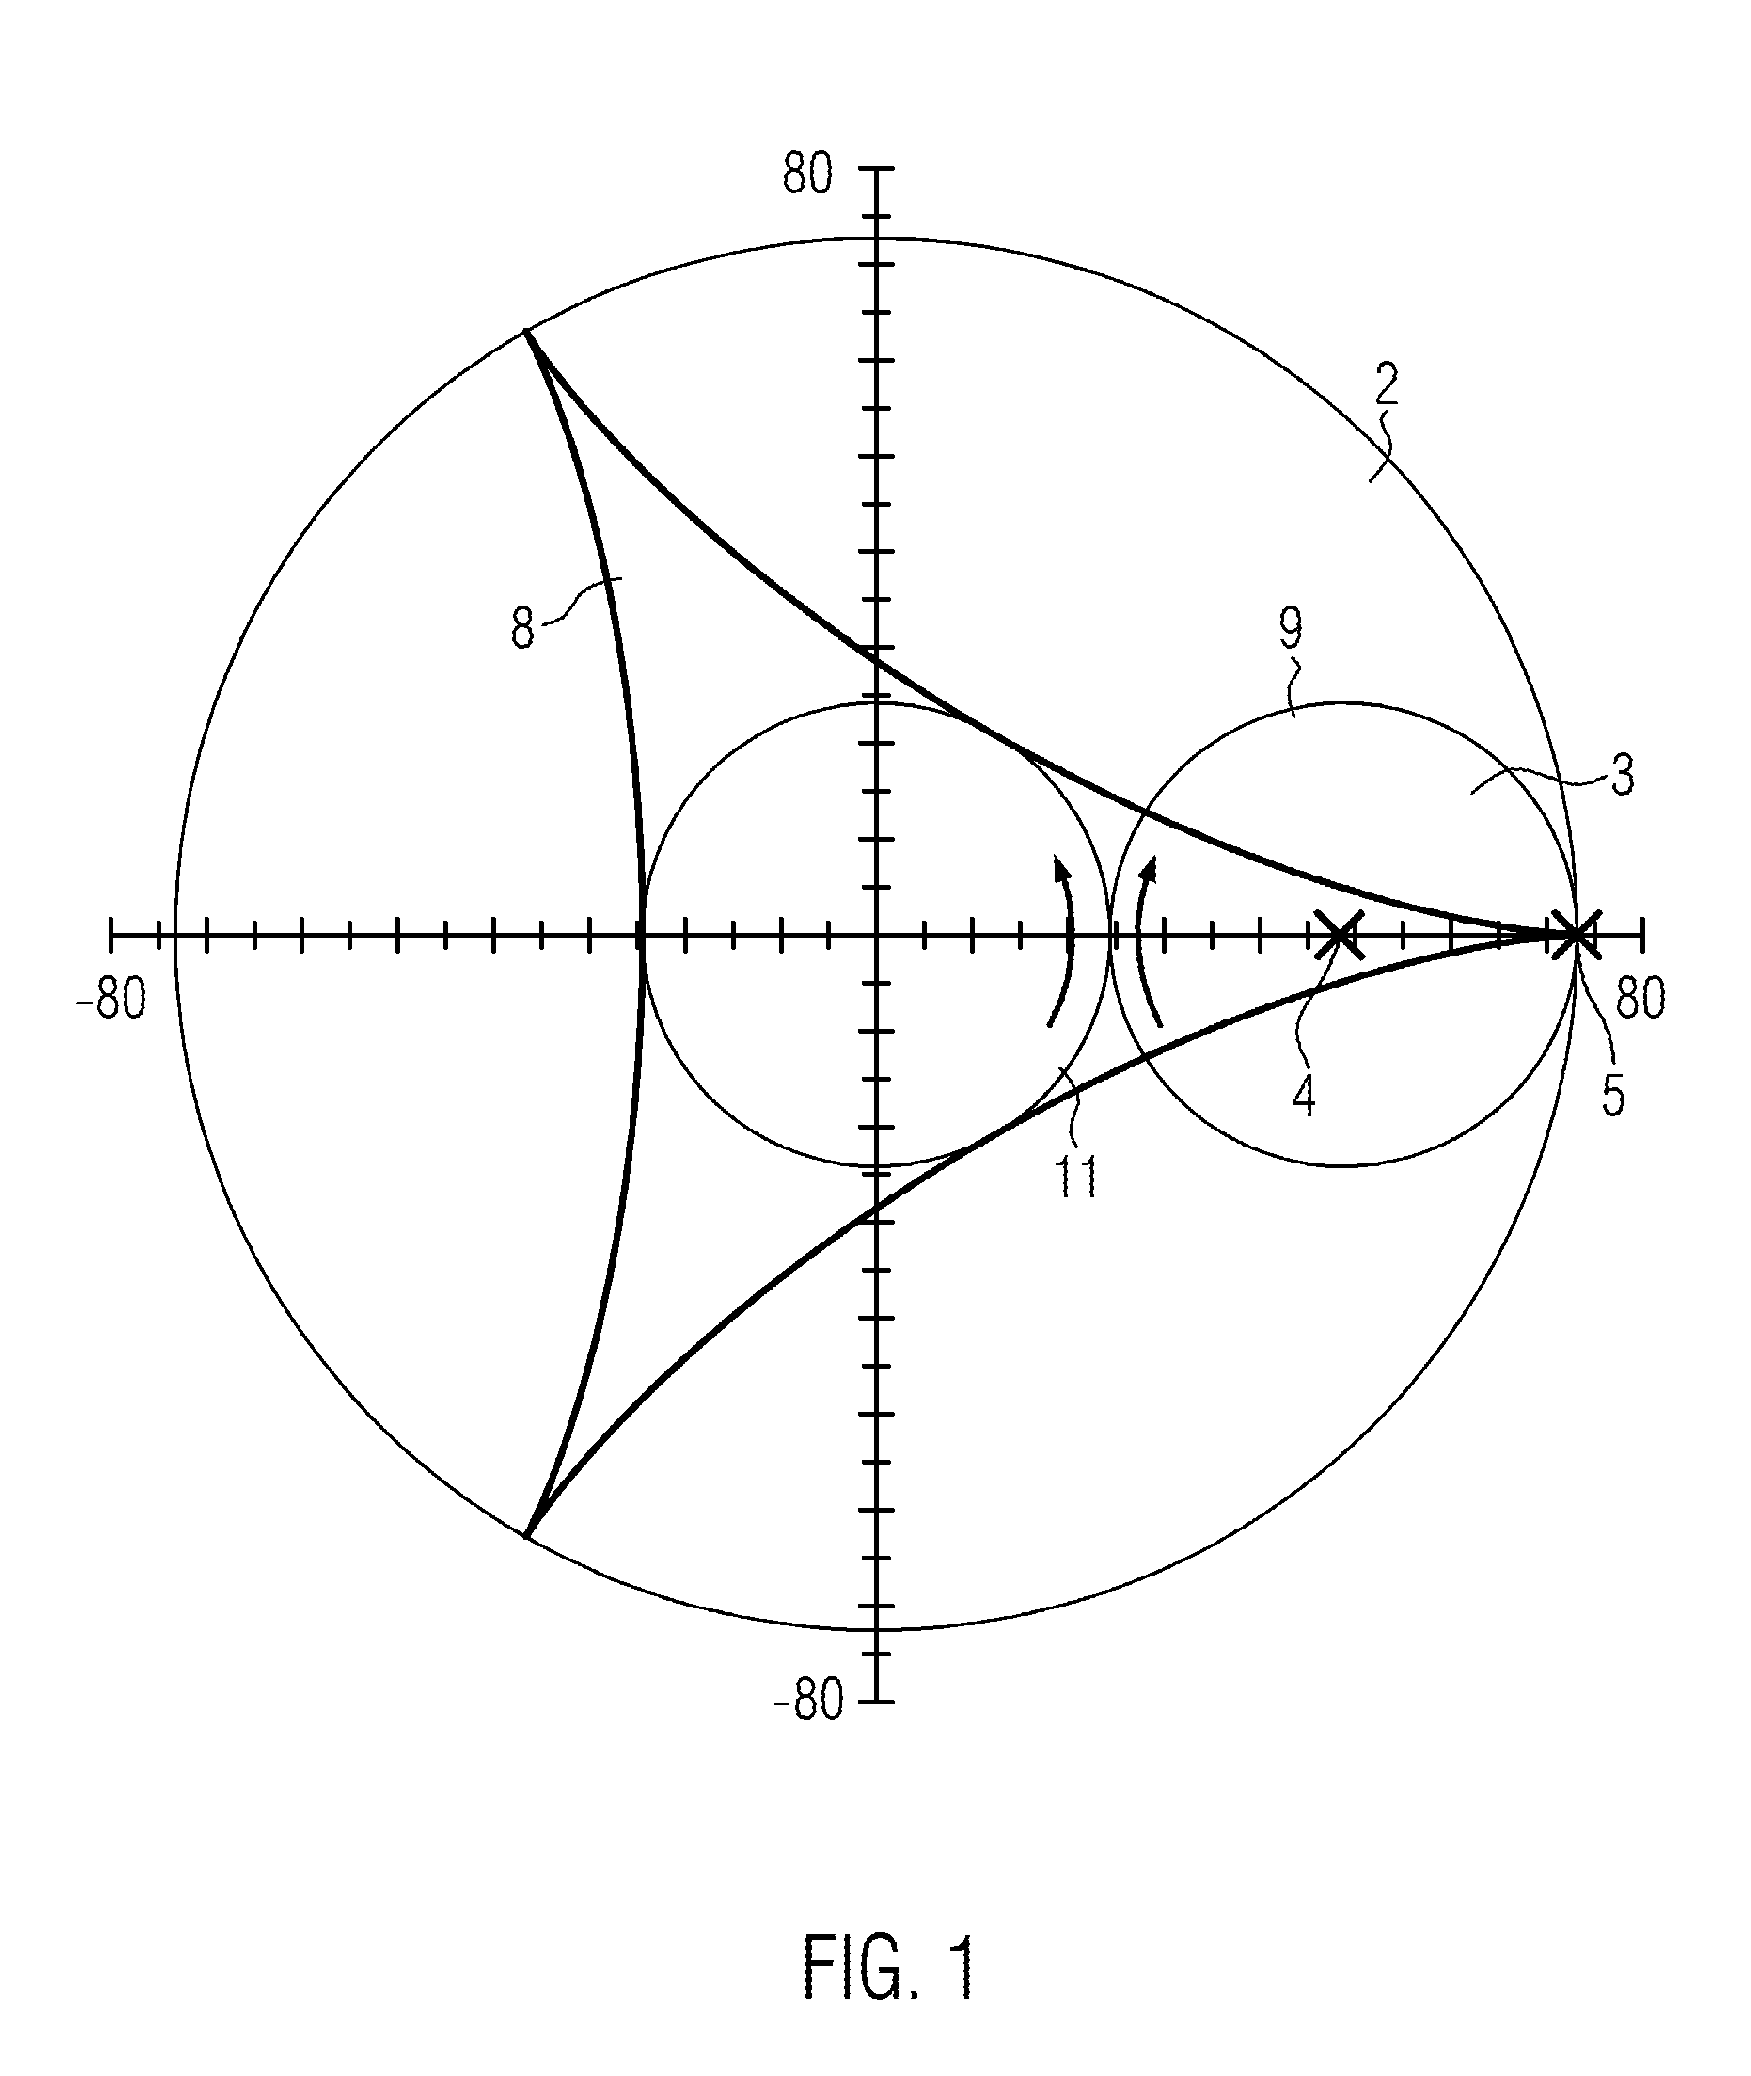 Reduction gearing with a high reduction ratio